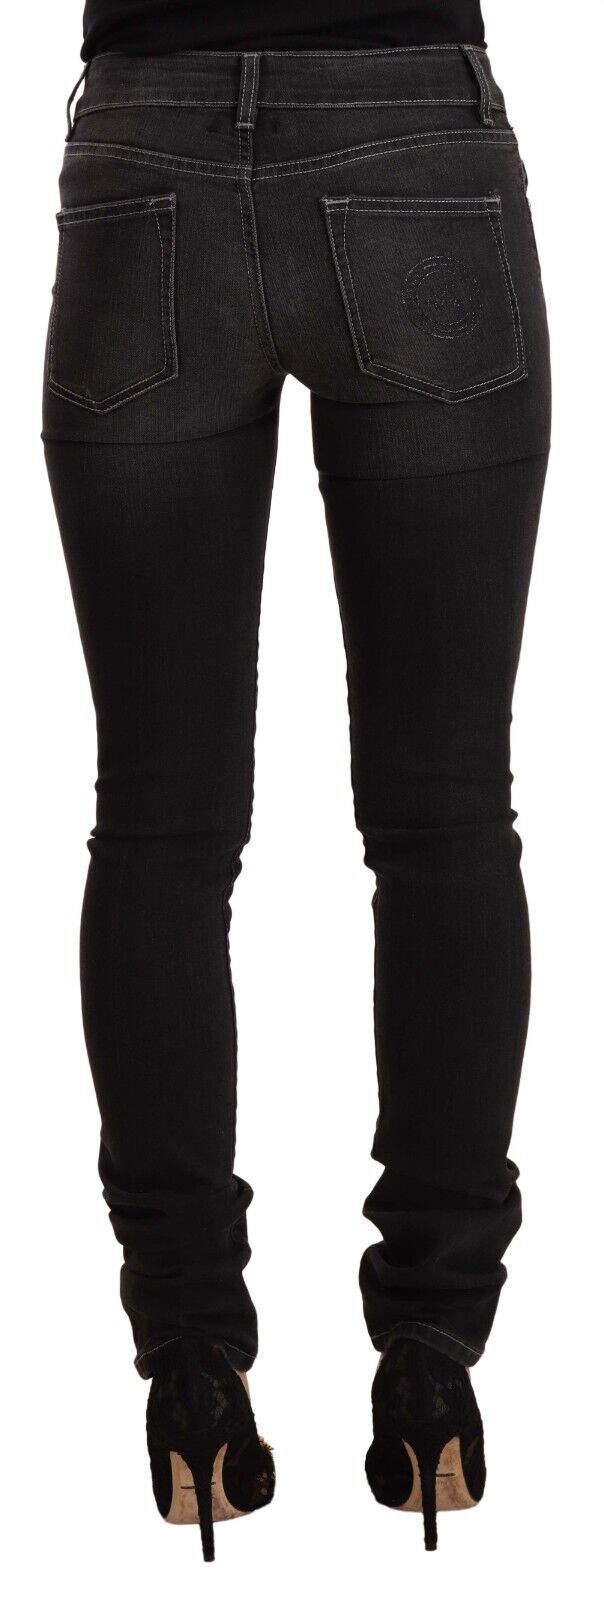 GF Ferre Black Washed Mid Waist Cotton Denim Skinny Jeans - Designed by GF Ferre Available to Buy at a Discounted Price on Moon Behind The Hill Online Designer Discount Store